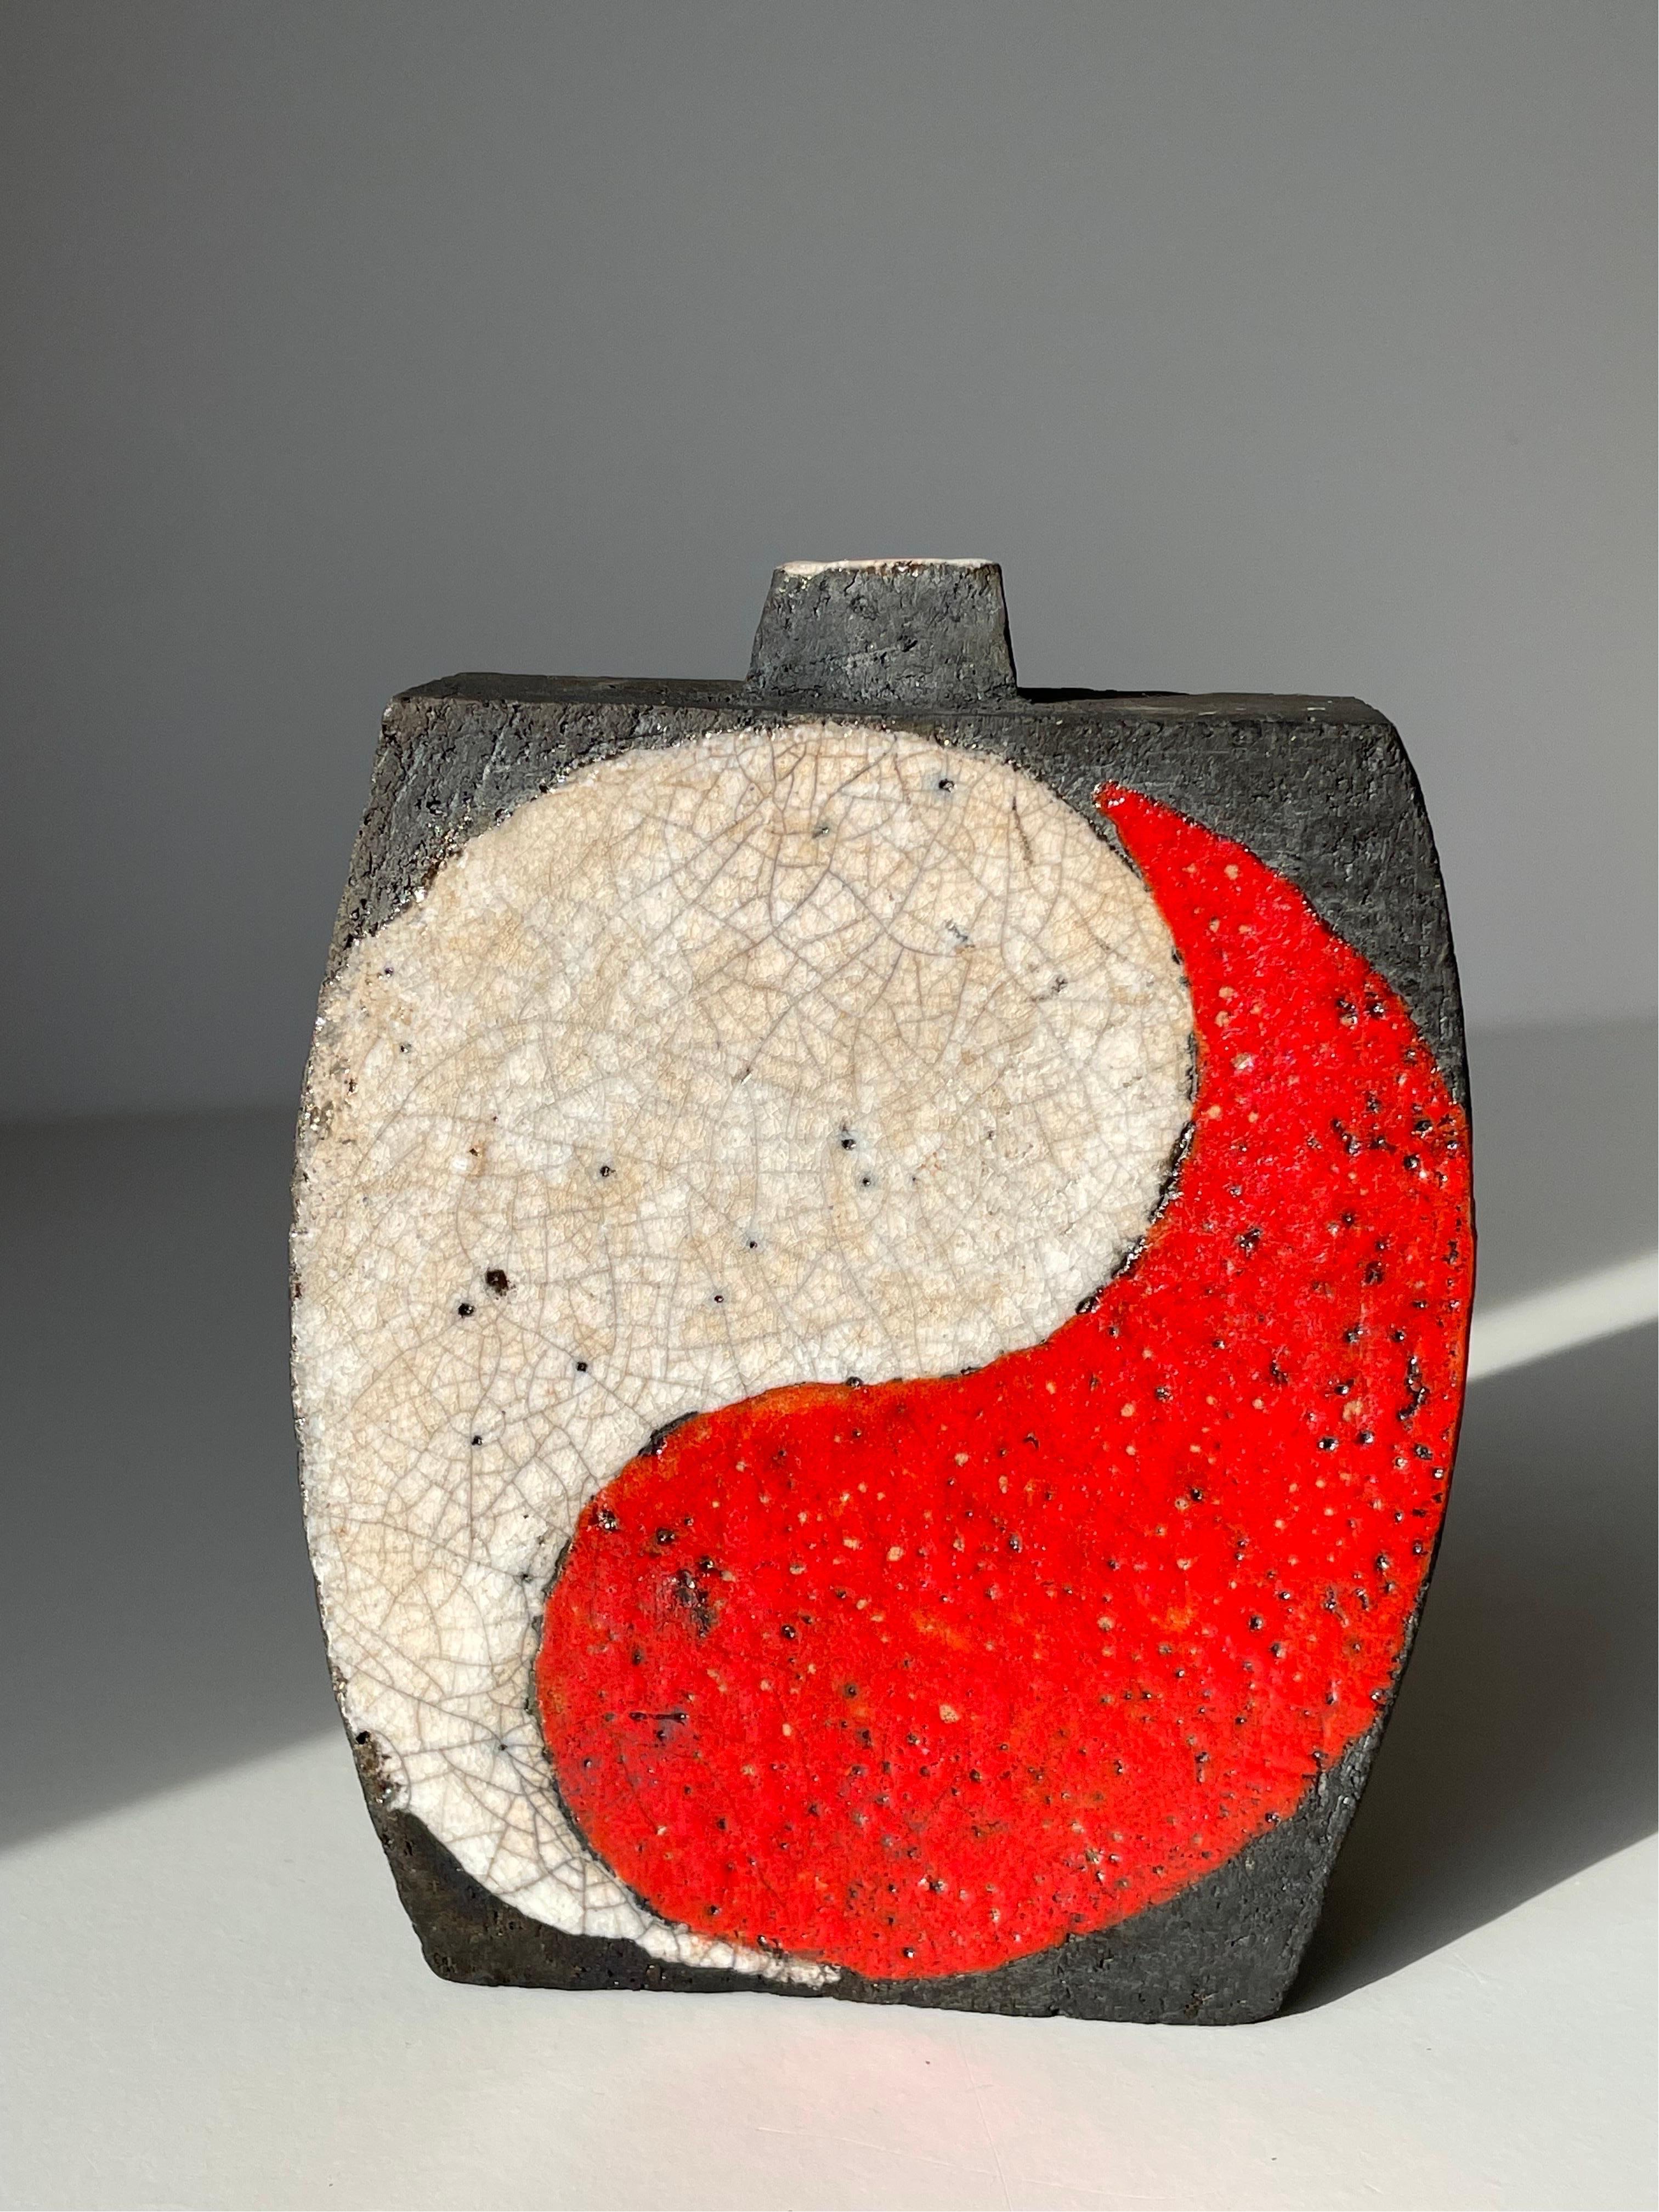 Vintage Japanese inspired decorative raku vase designed and handmade by Danish ceramic artist in the late 20th century. Graphic decor in shiny red and white crackle glaze on both sides creating a dramatic effect on the anthracite colored ceramic